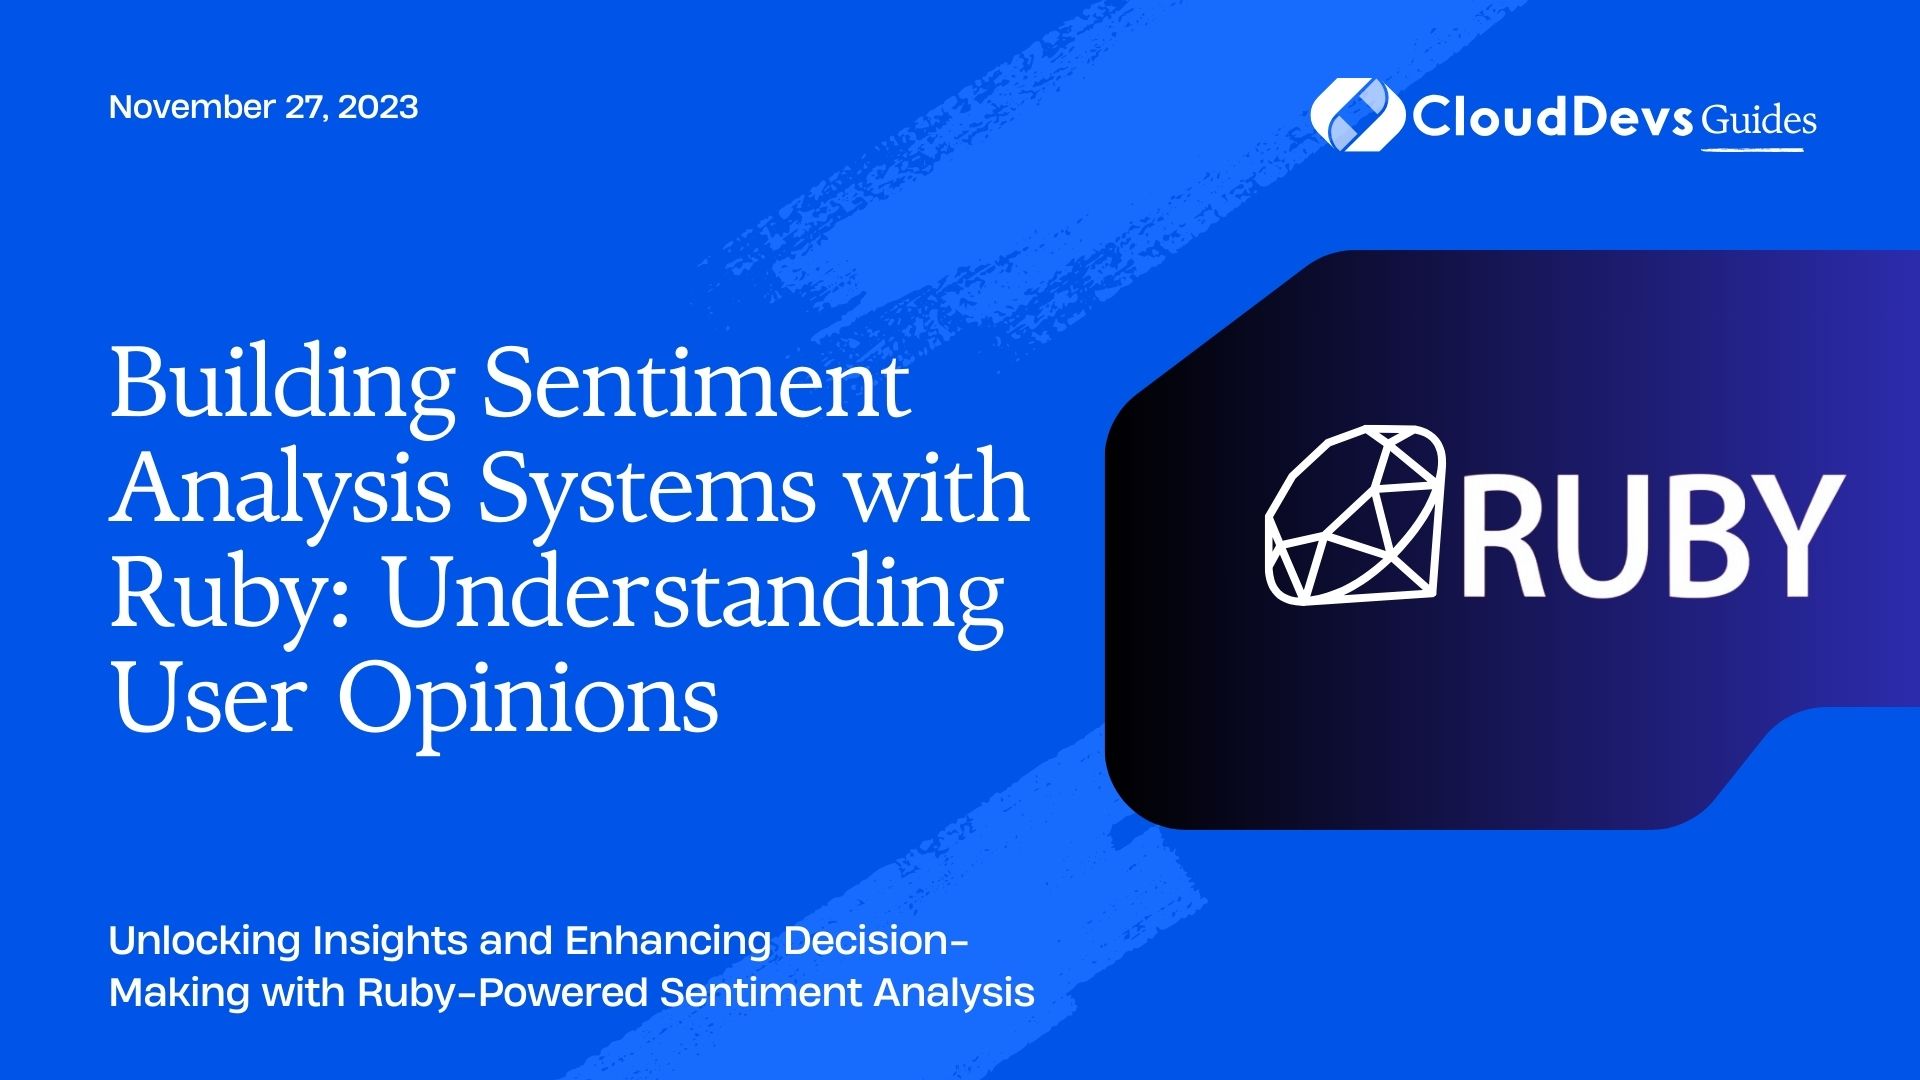 Building Sentiment Analysis Systems with Ruby: Understanding User Opinions